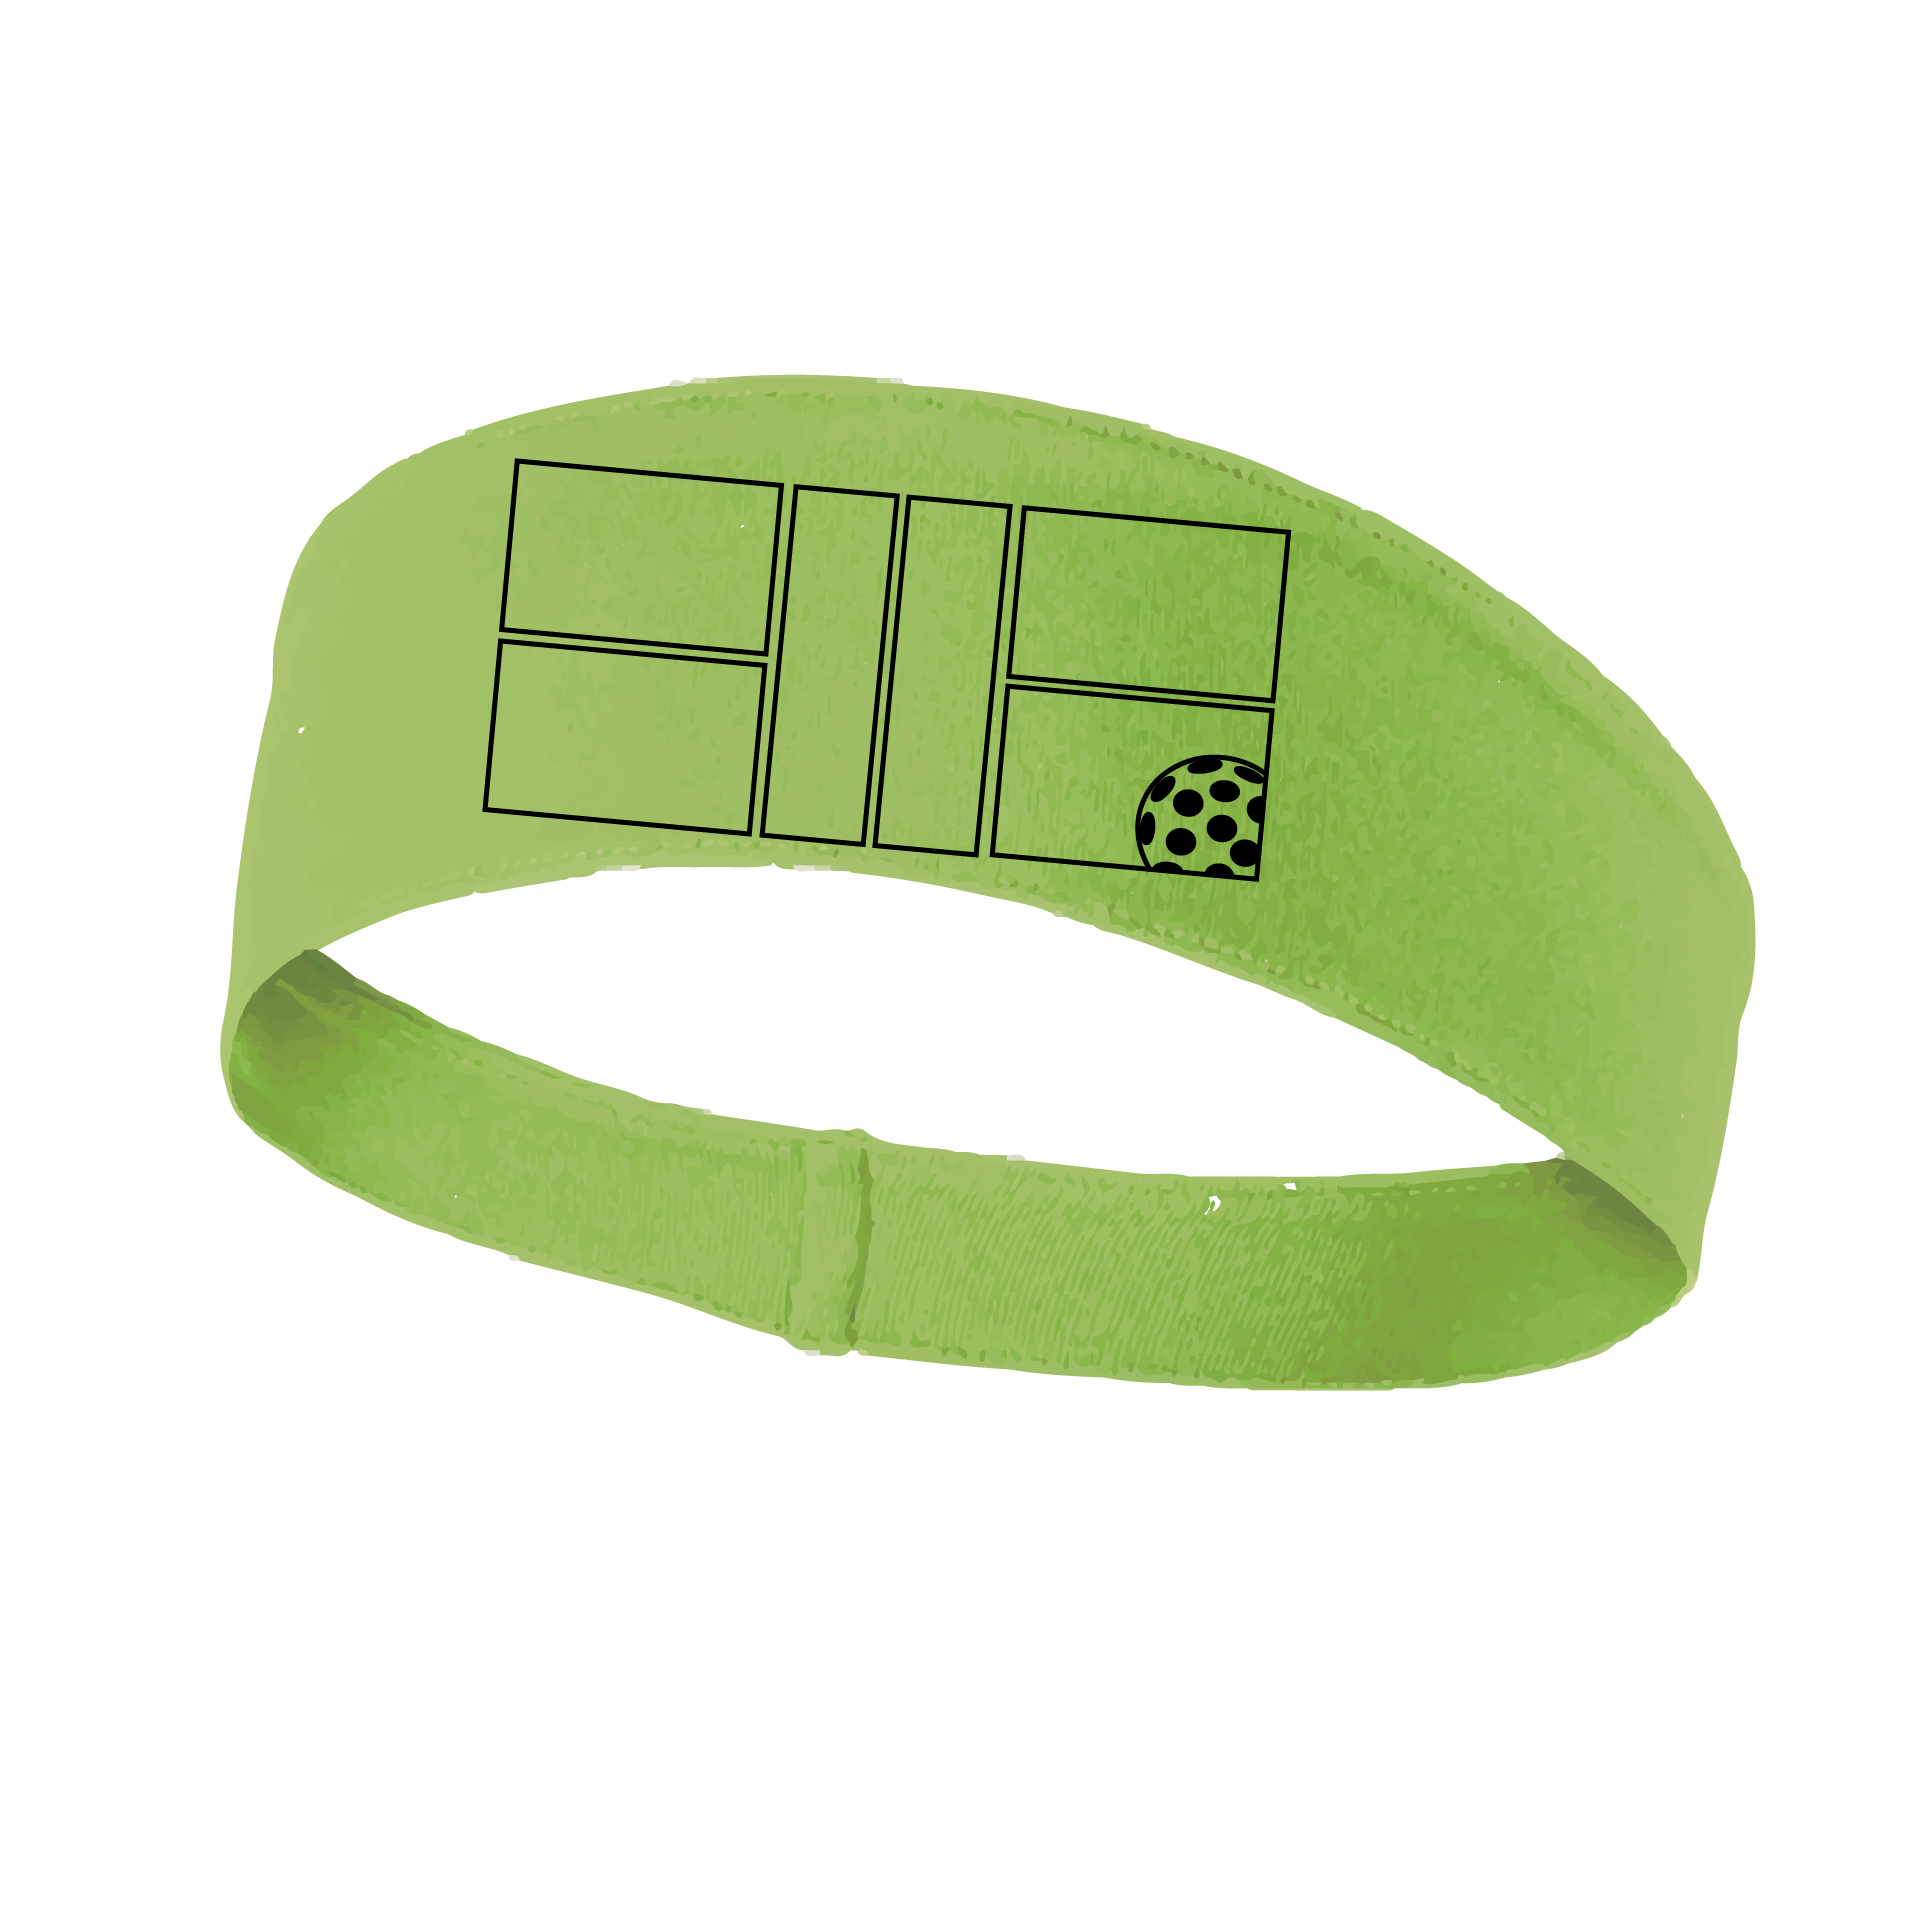 Pickleball Headband Design: Black Pickleball Court with Pickleball  This fun, pickleball designed, moisture-wicking headband narrows in the back to fit more securely. Single-needle top-stitched edging. These headbands come in a variety of colors. Truly shows your love for the sport of pickleball!!